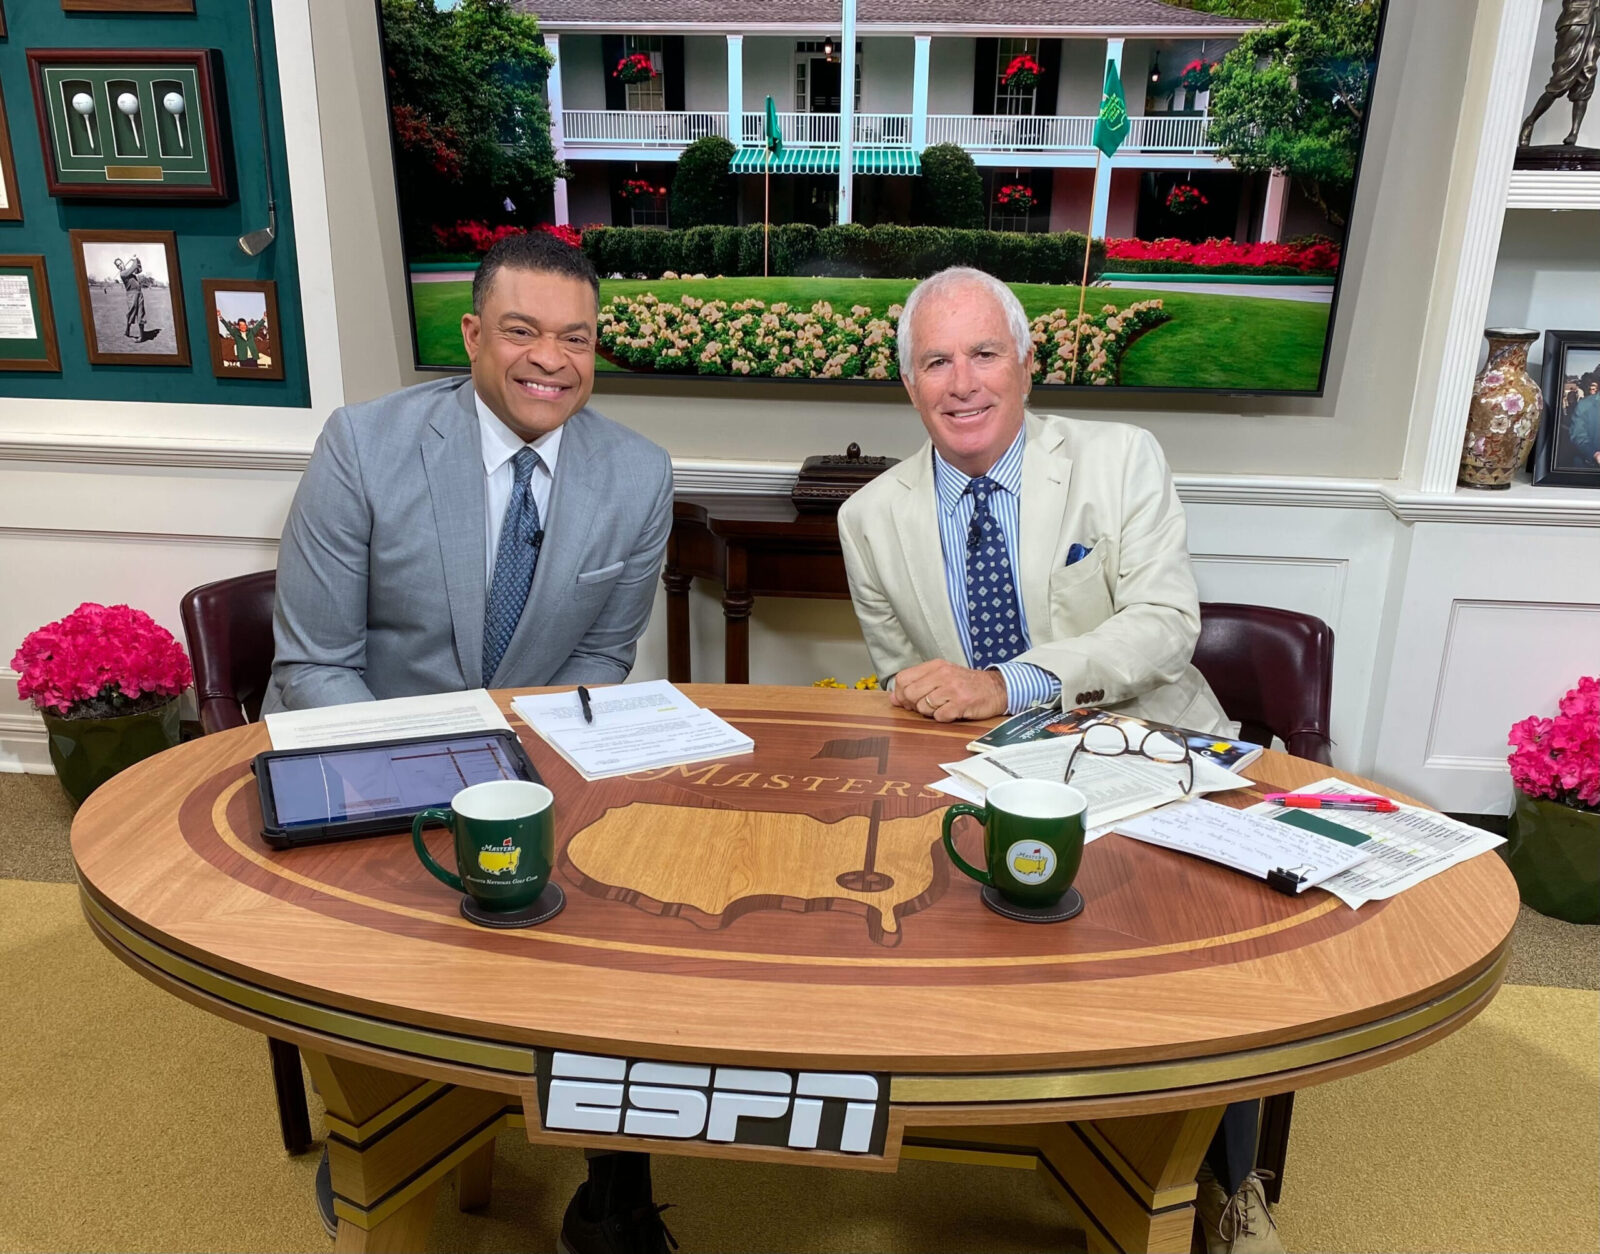 Before Covering the Masters, ESPN Analyst Curtis Strange Reflects on a Quarter Century of Calling Golf